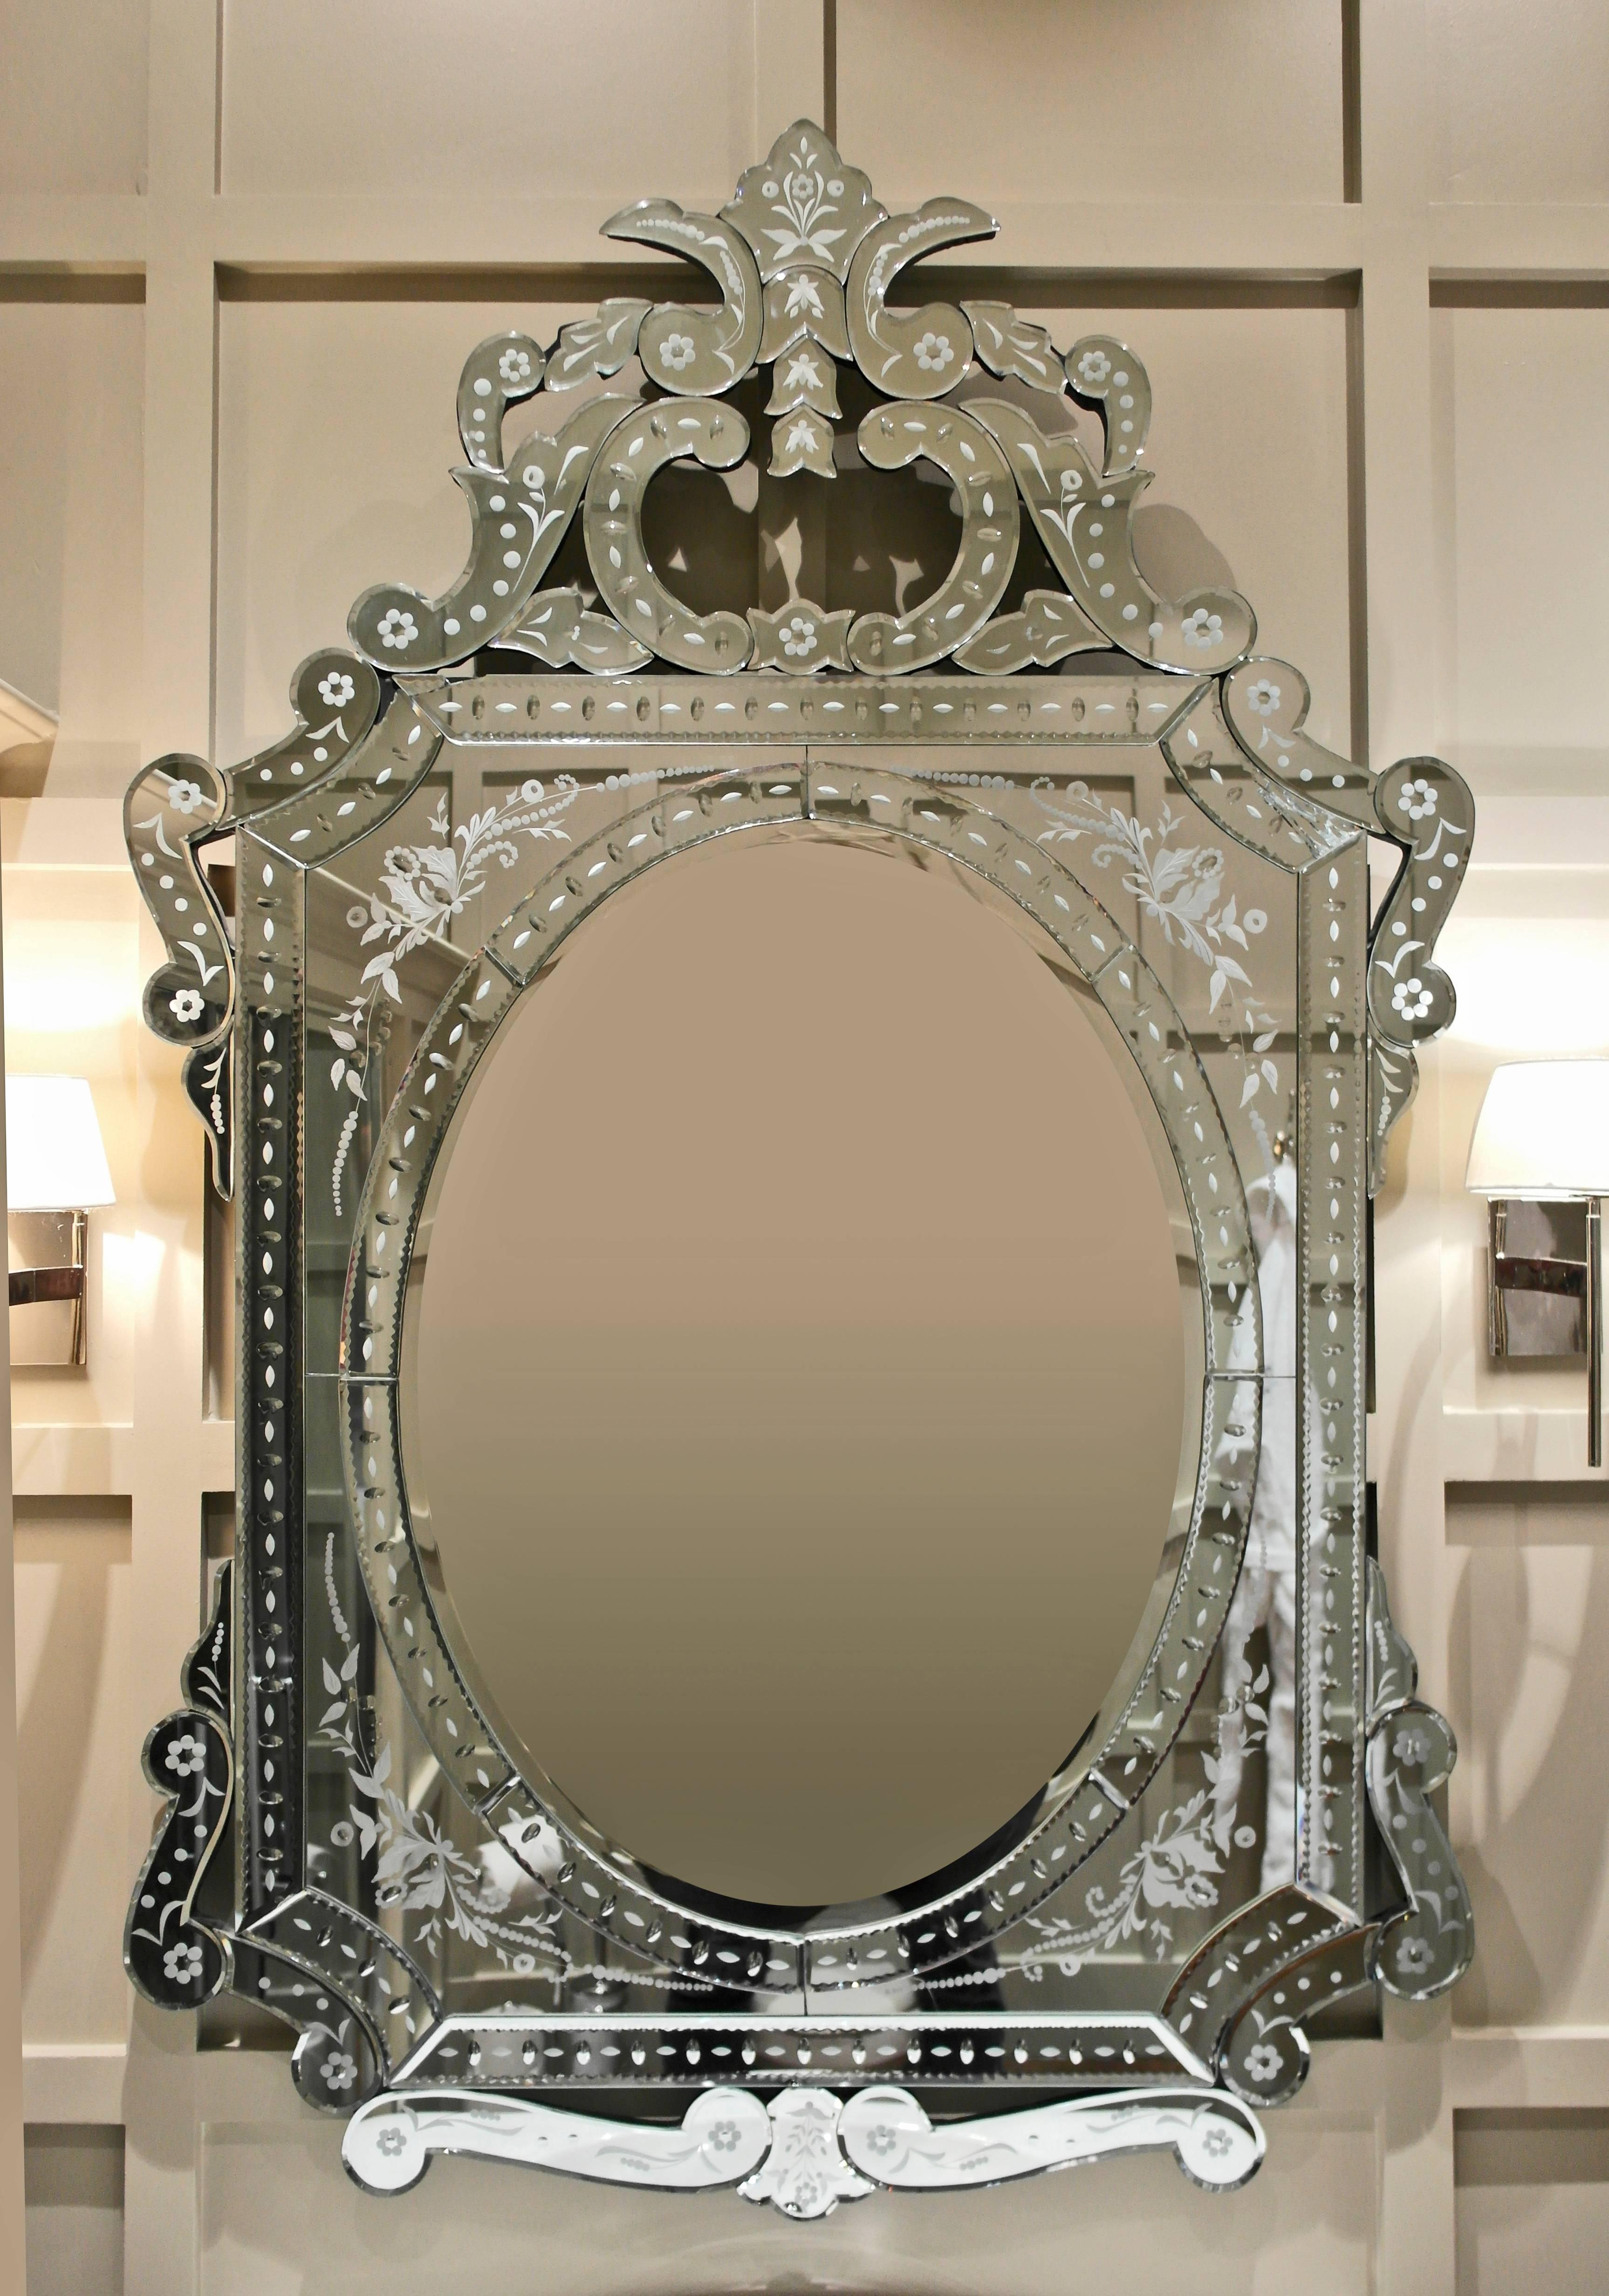 Large rectangular mirror framed with ribbon scroll design featuring etched florettes.